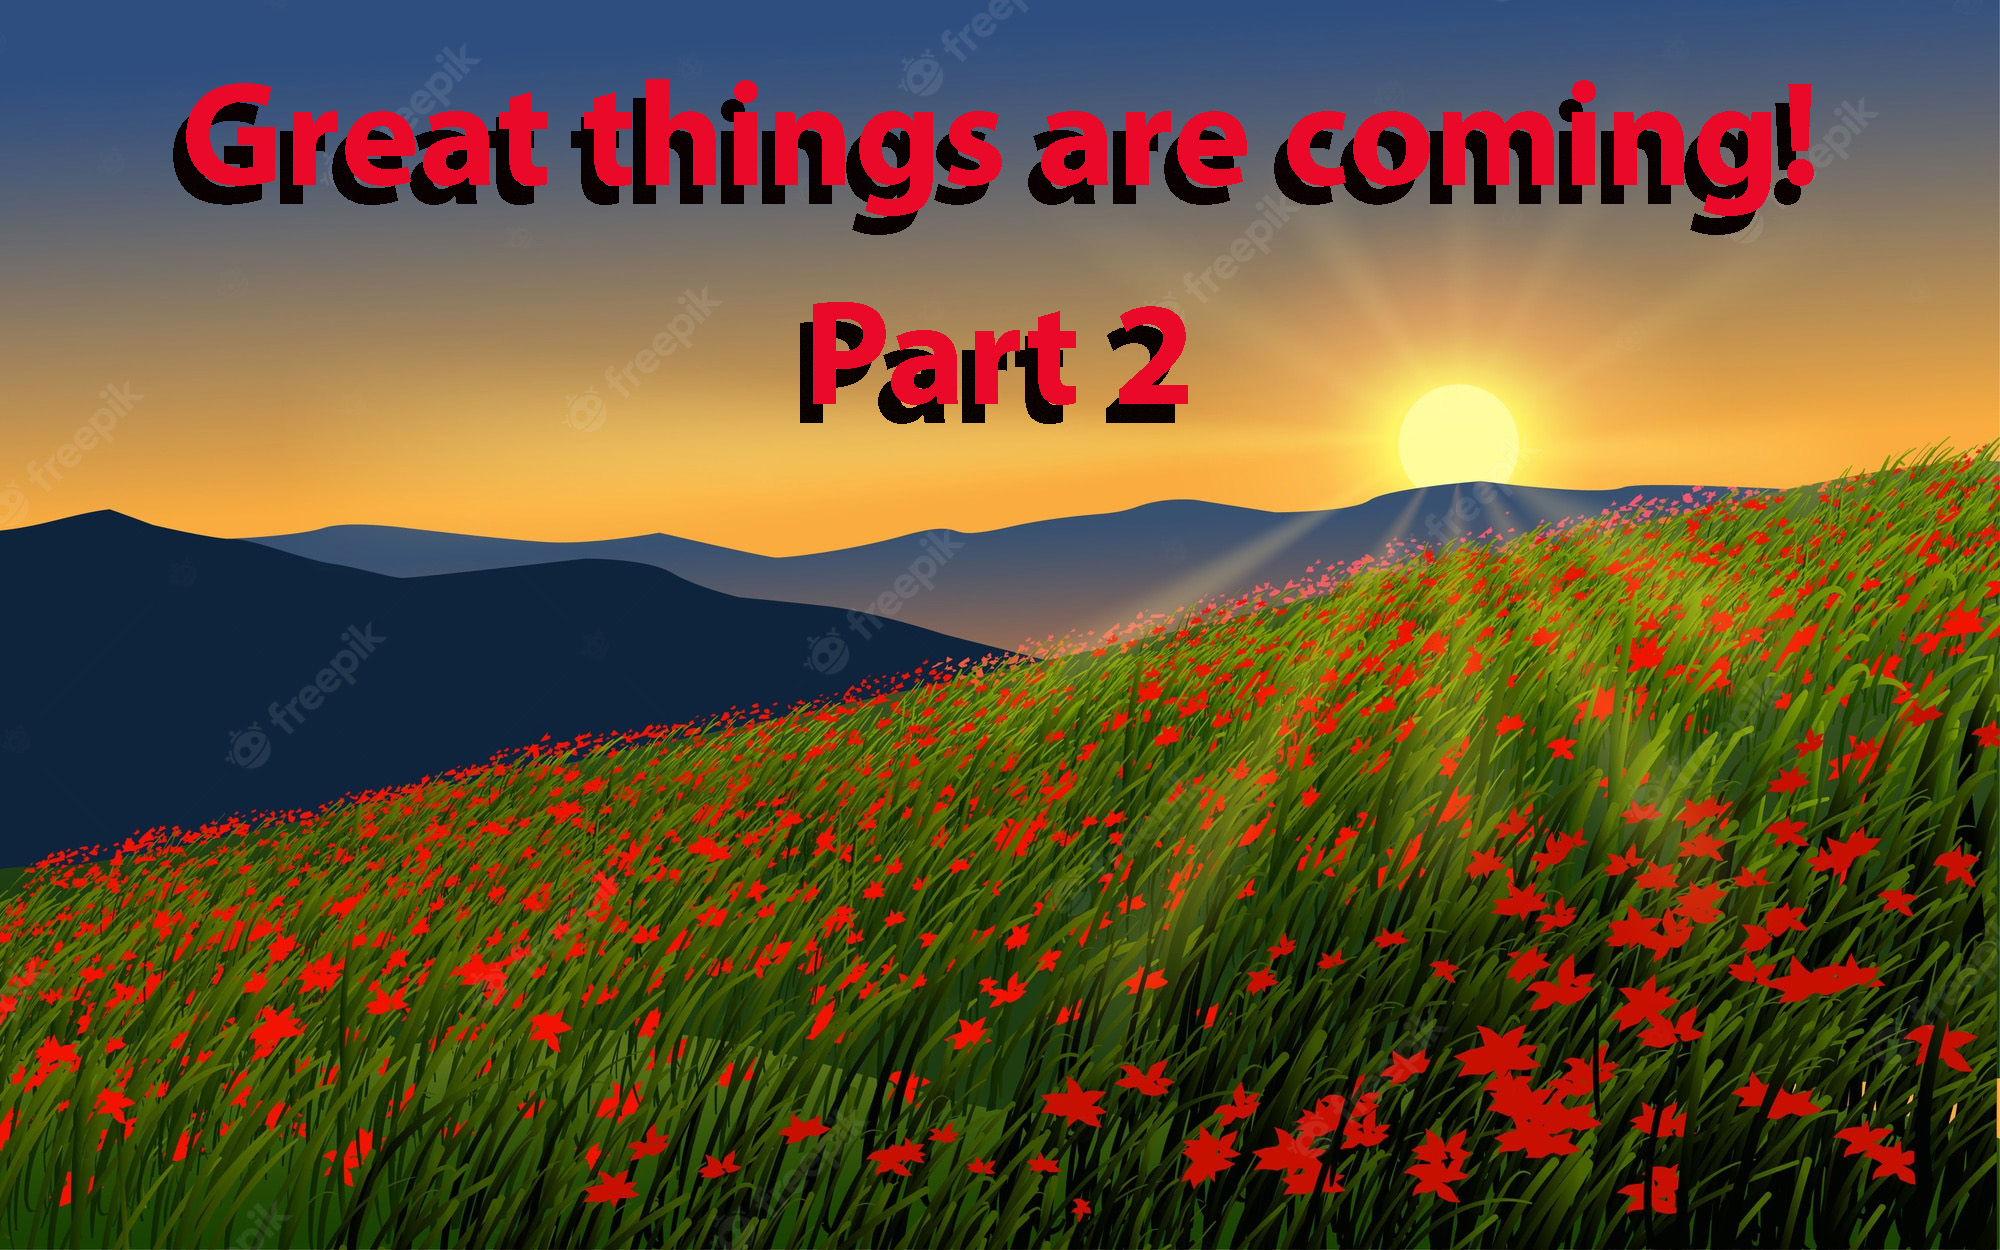 Great things are coming….trust the preparation! Part 2